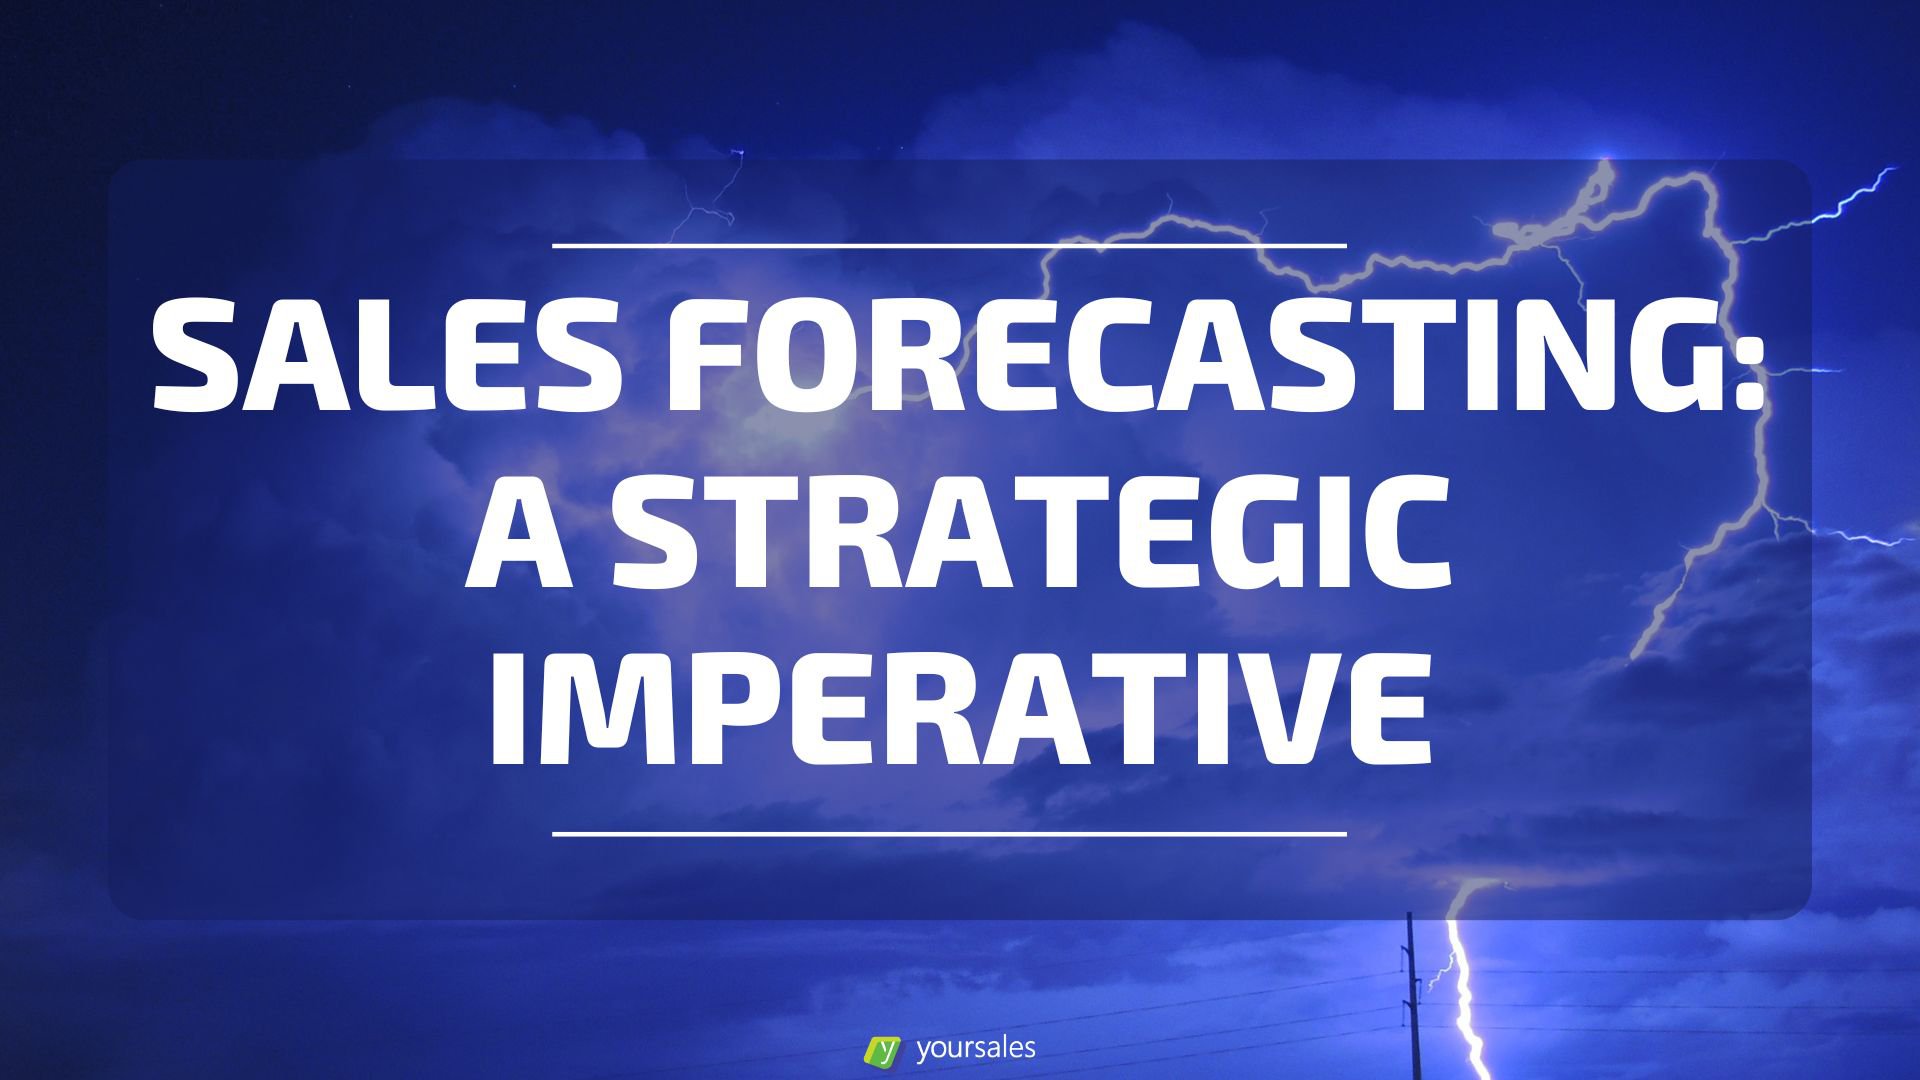 Featured image for “Sales Forecasting: A Strategic Imperative”